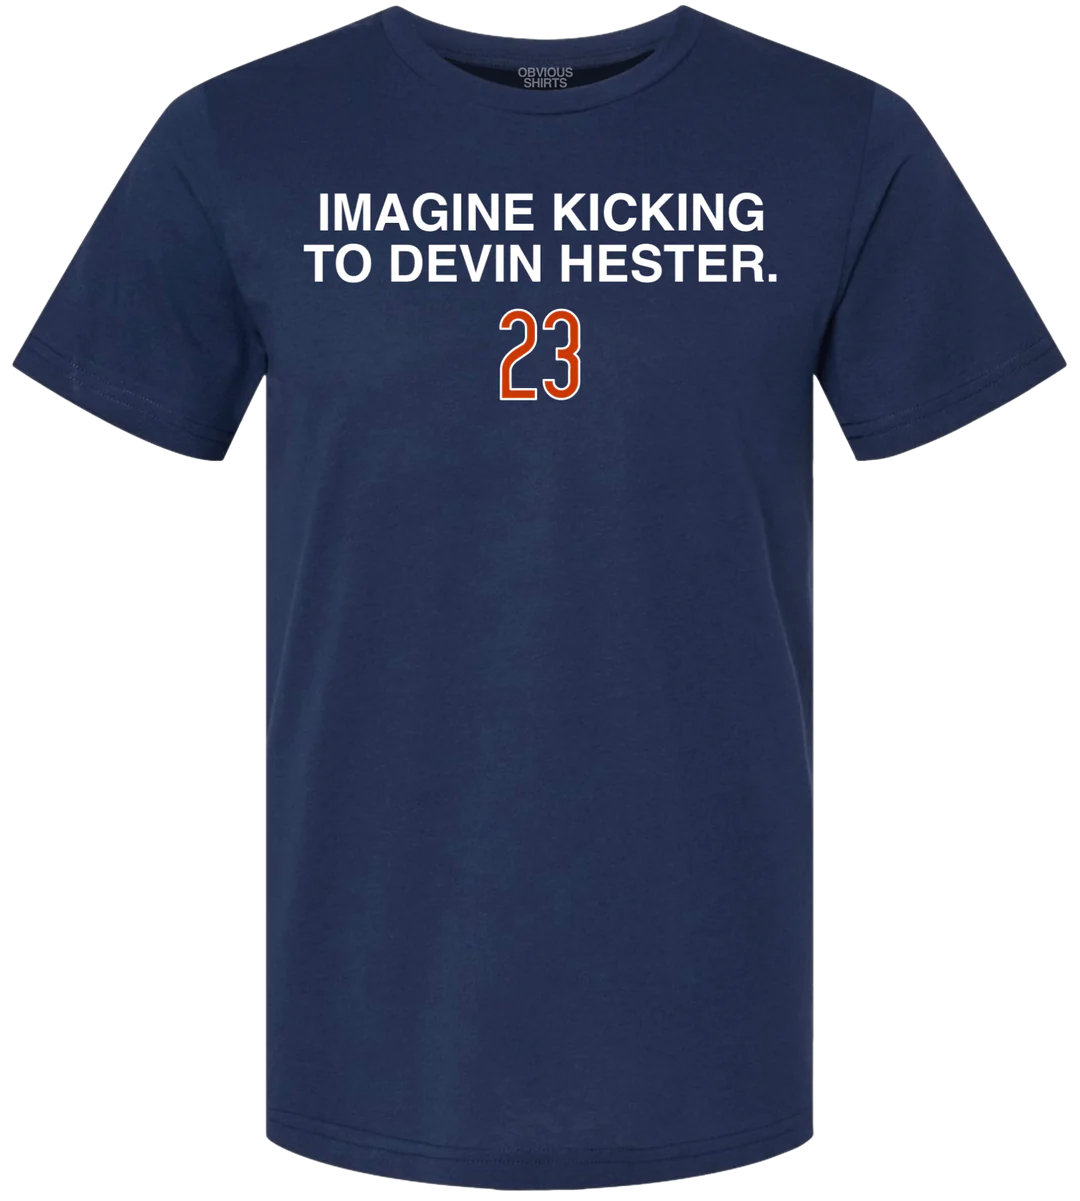 Men's Imagine Kicking To Devin Hester By Obvious Shirts Navy Tee